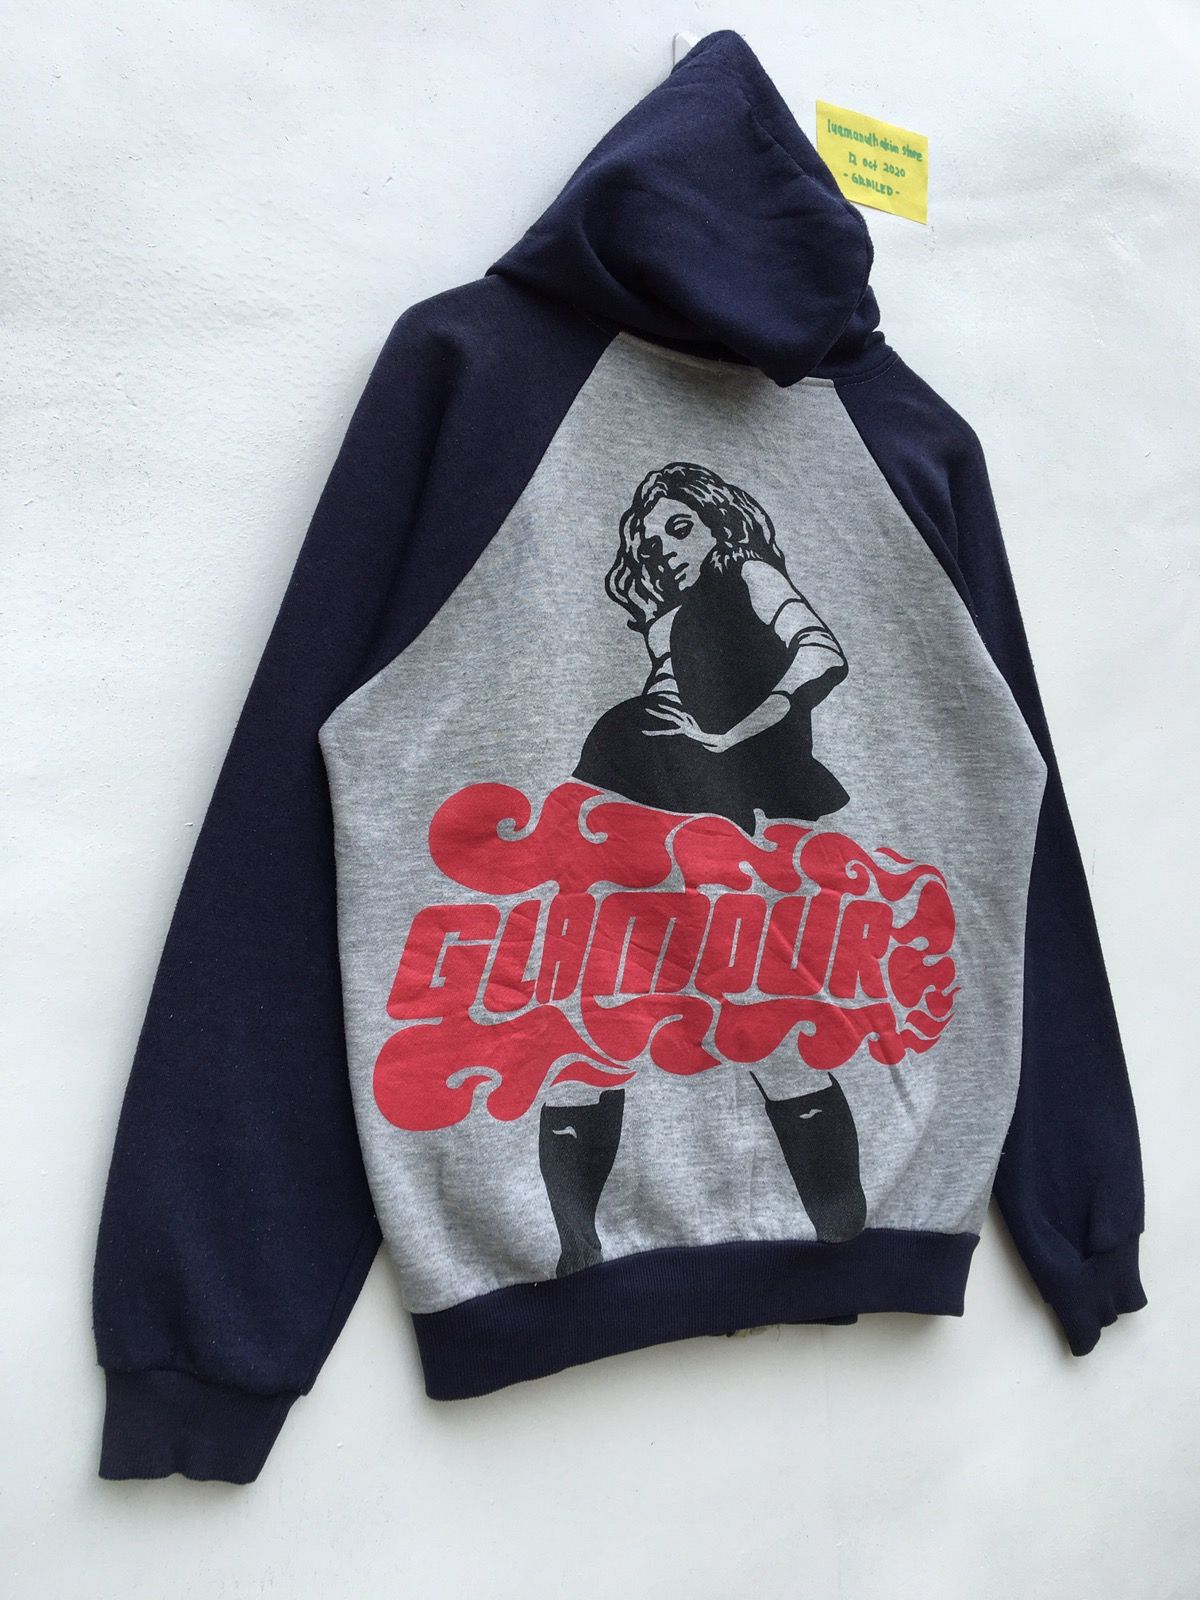 Hysteric Glamour Rare Vtg Hysteric Glamour Big Logo Zipper Hoodie Size US S / EU 44-46 / 1 - 2 Preview